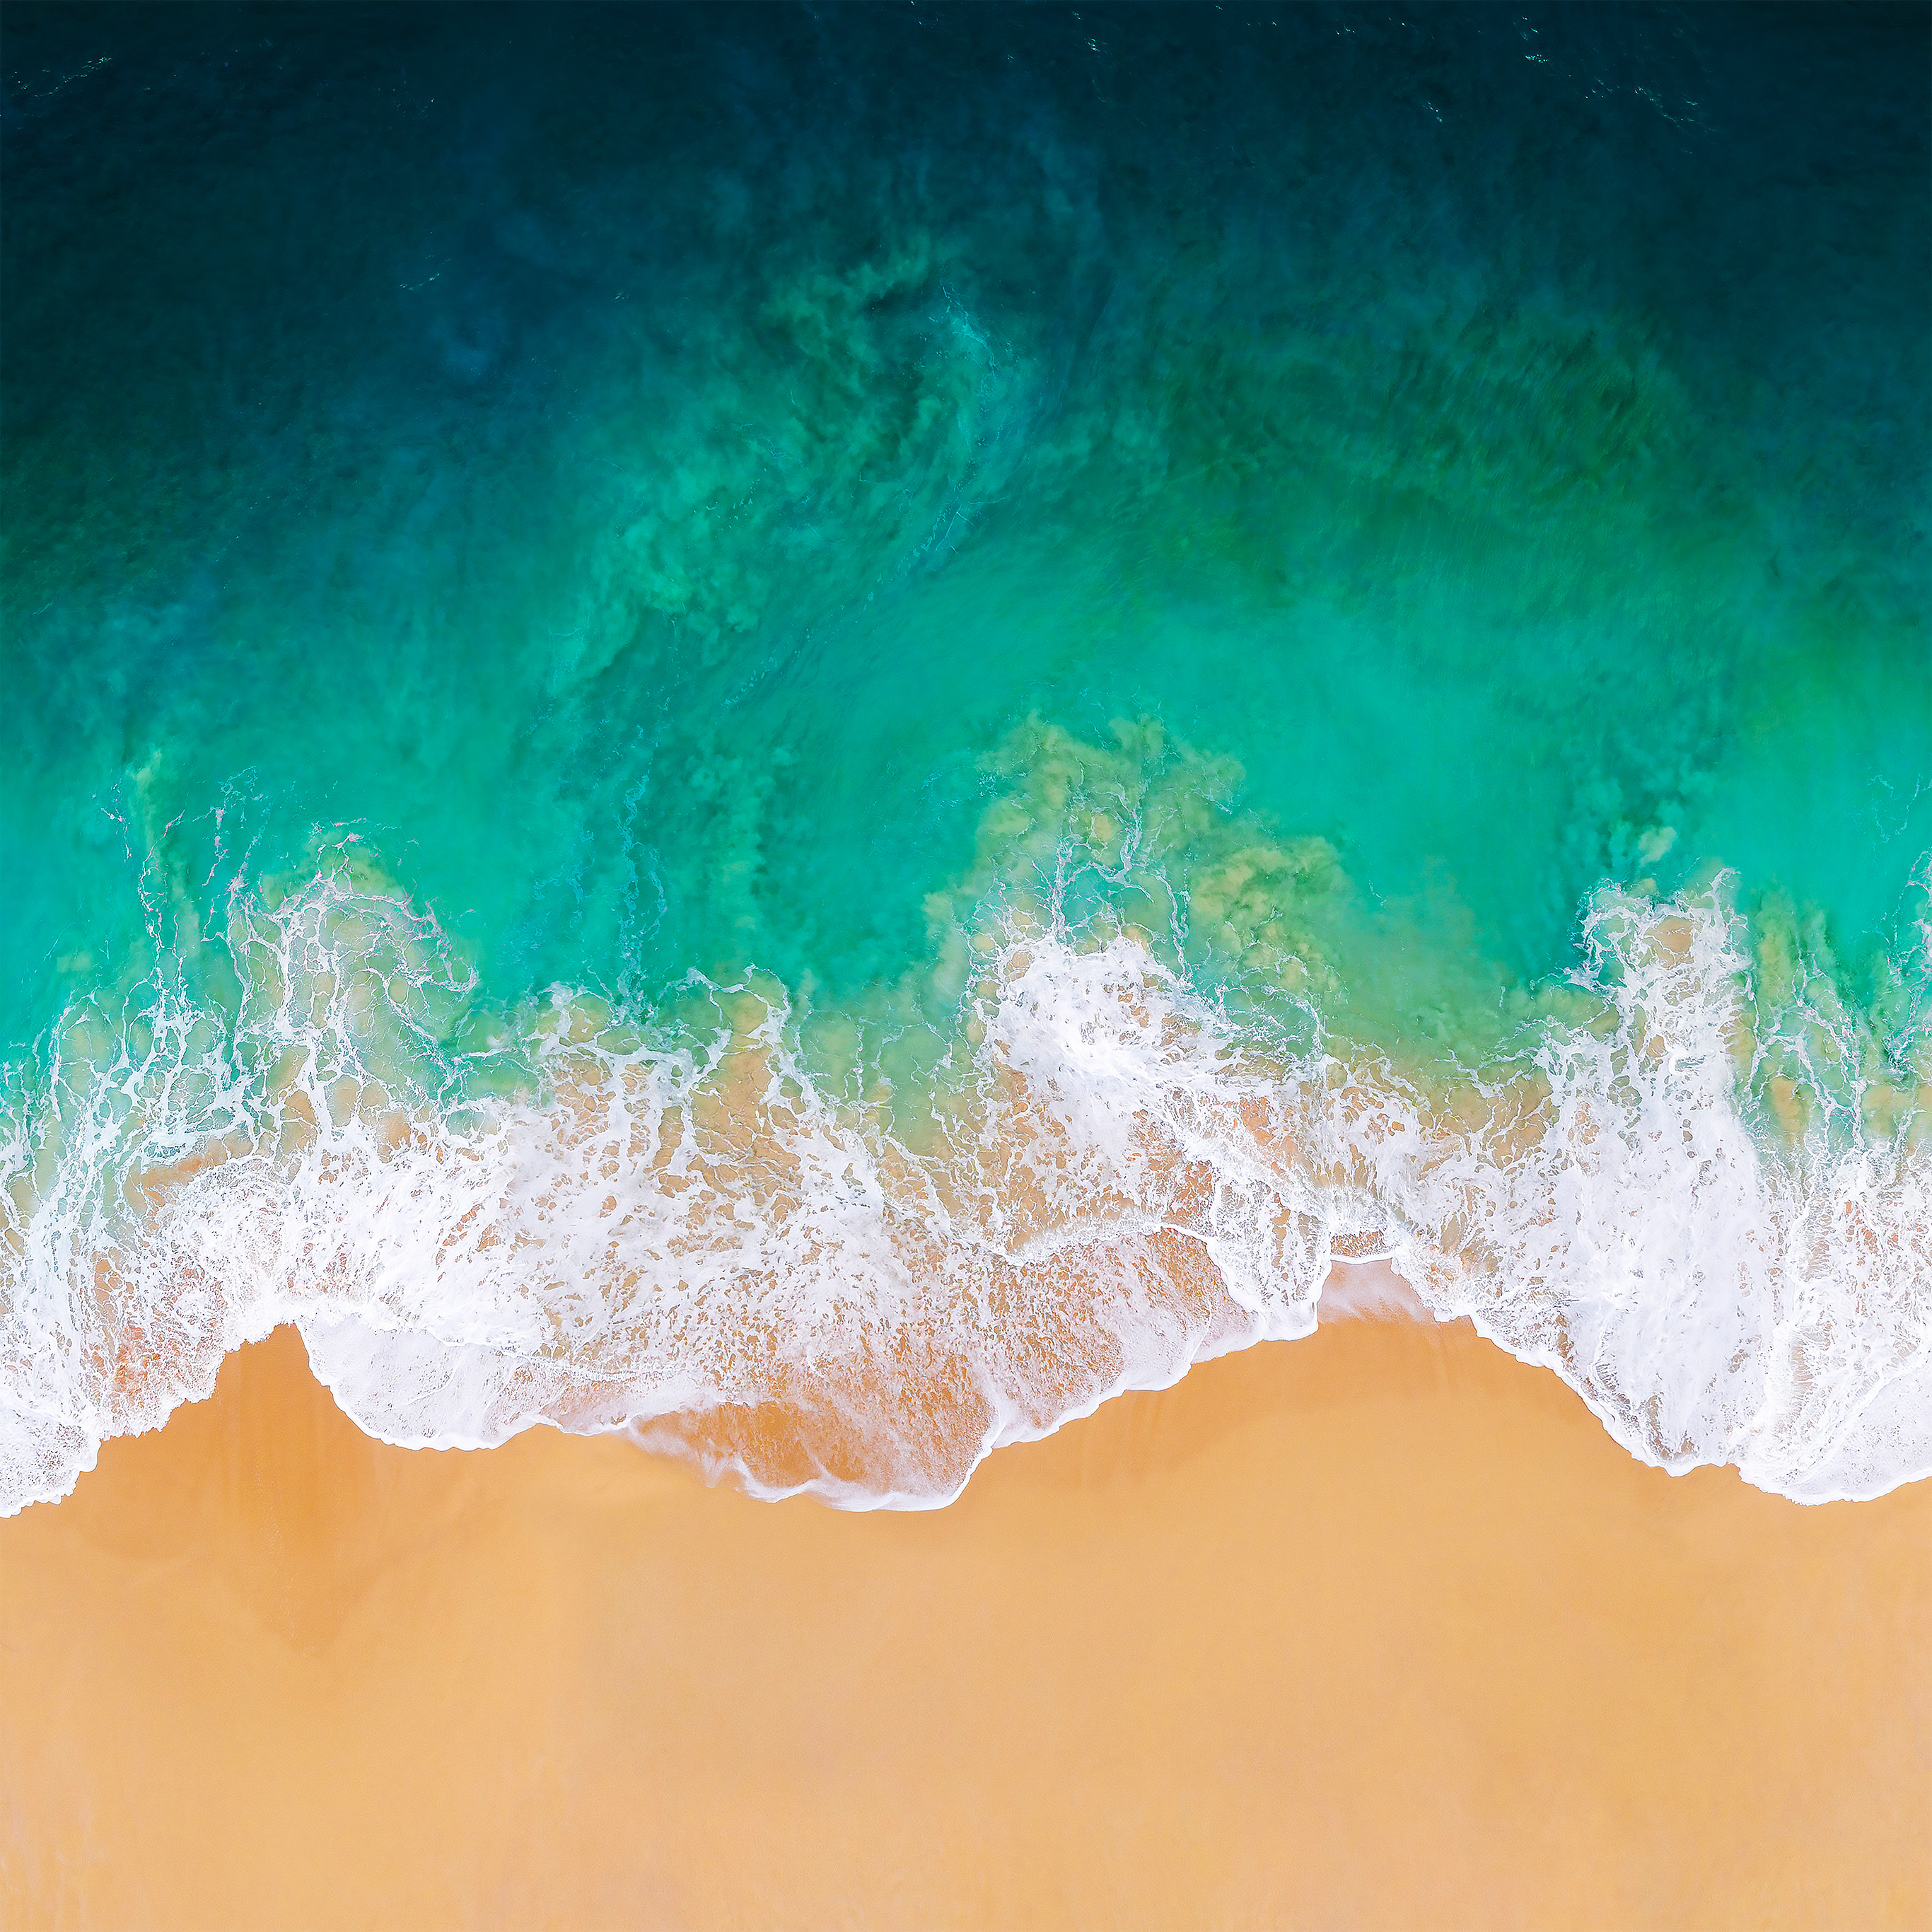 ios 11 wallpaper,green,blue,water,wave,turquoise